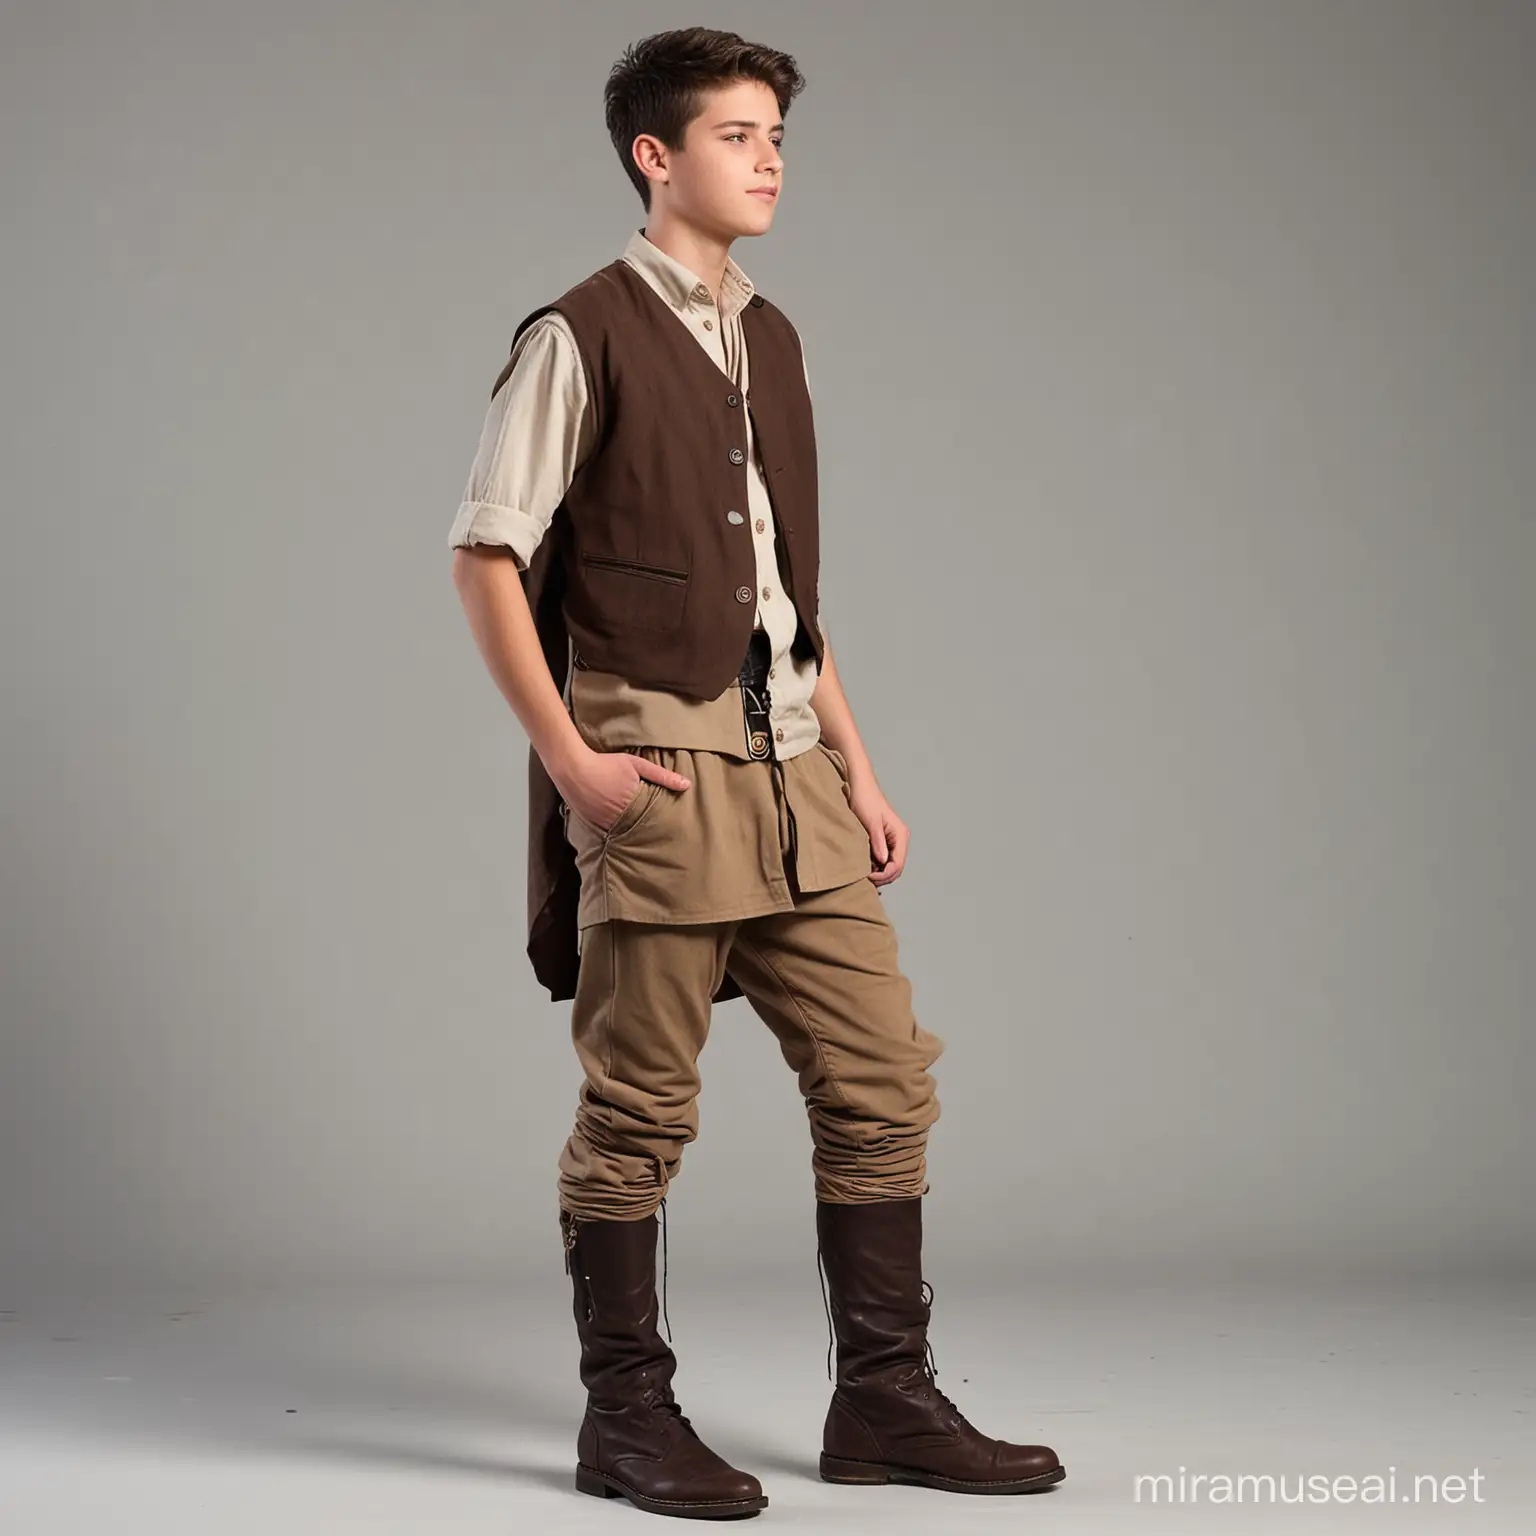 18 years old young boy wearing Tunic, vest, pants, boots & looking for  something sideway

